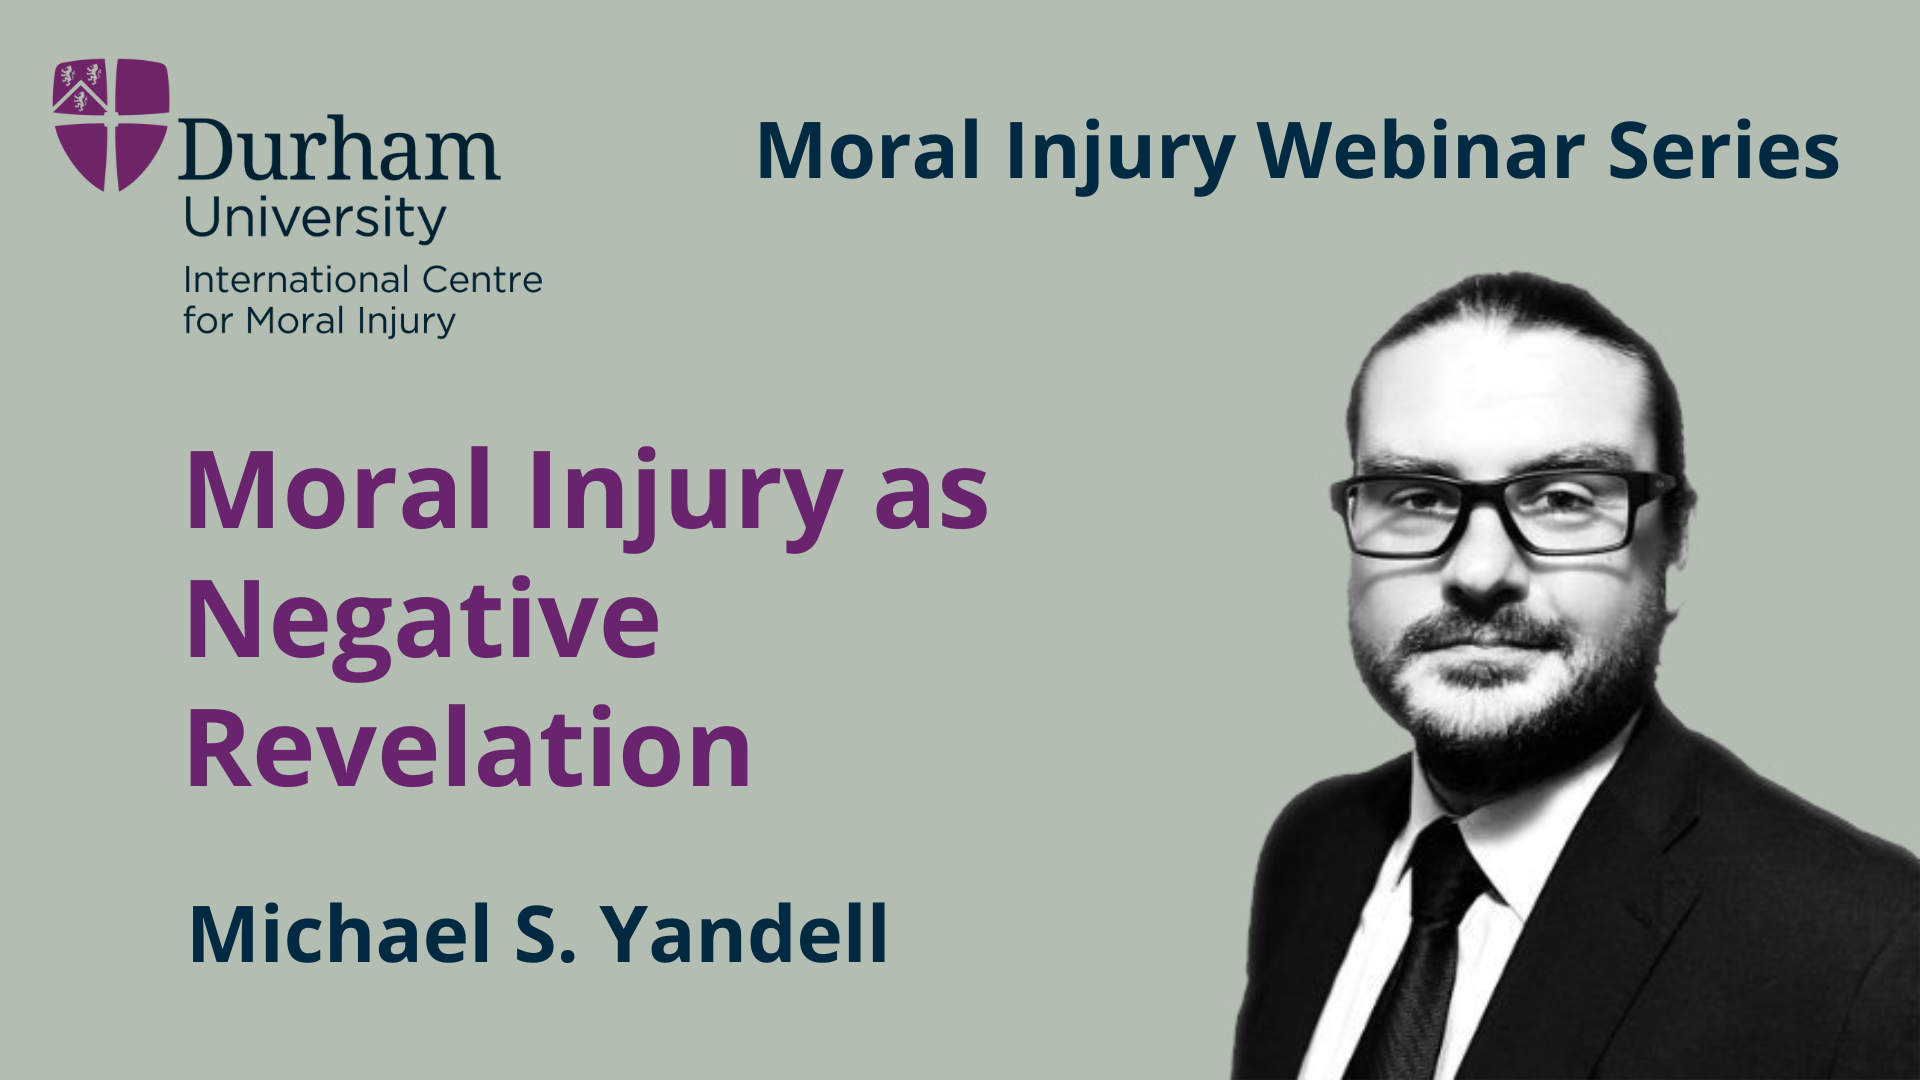 Moral Injury as Negative Revelation, by Michael S. Yandell